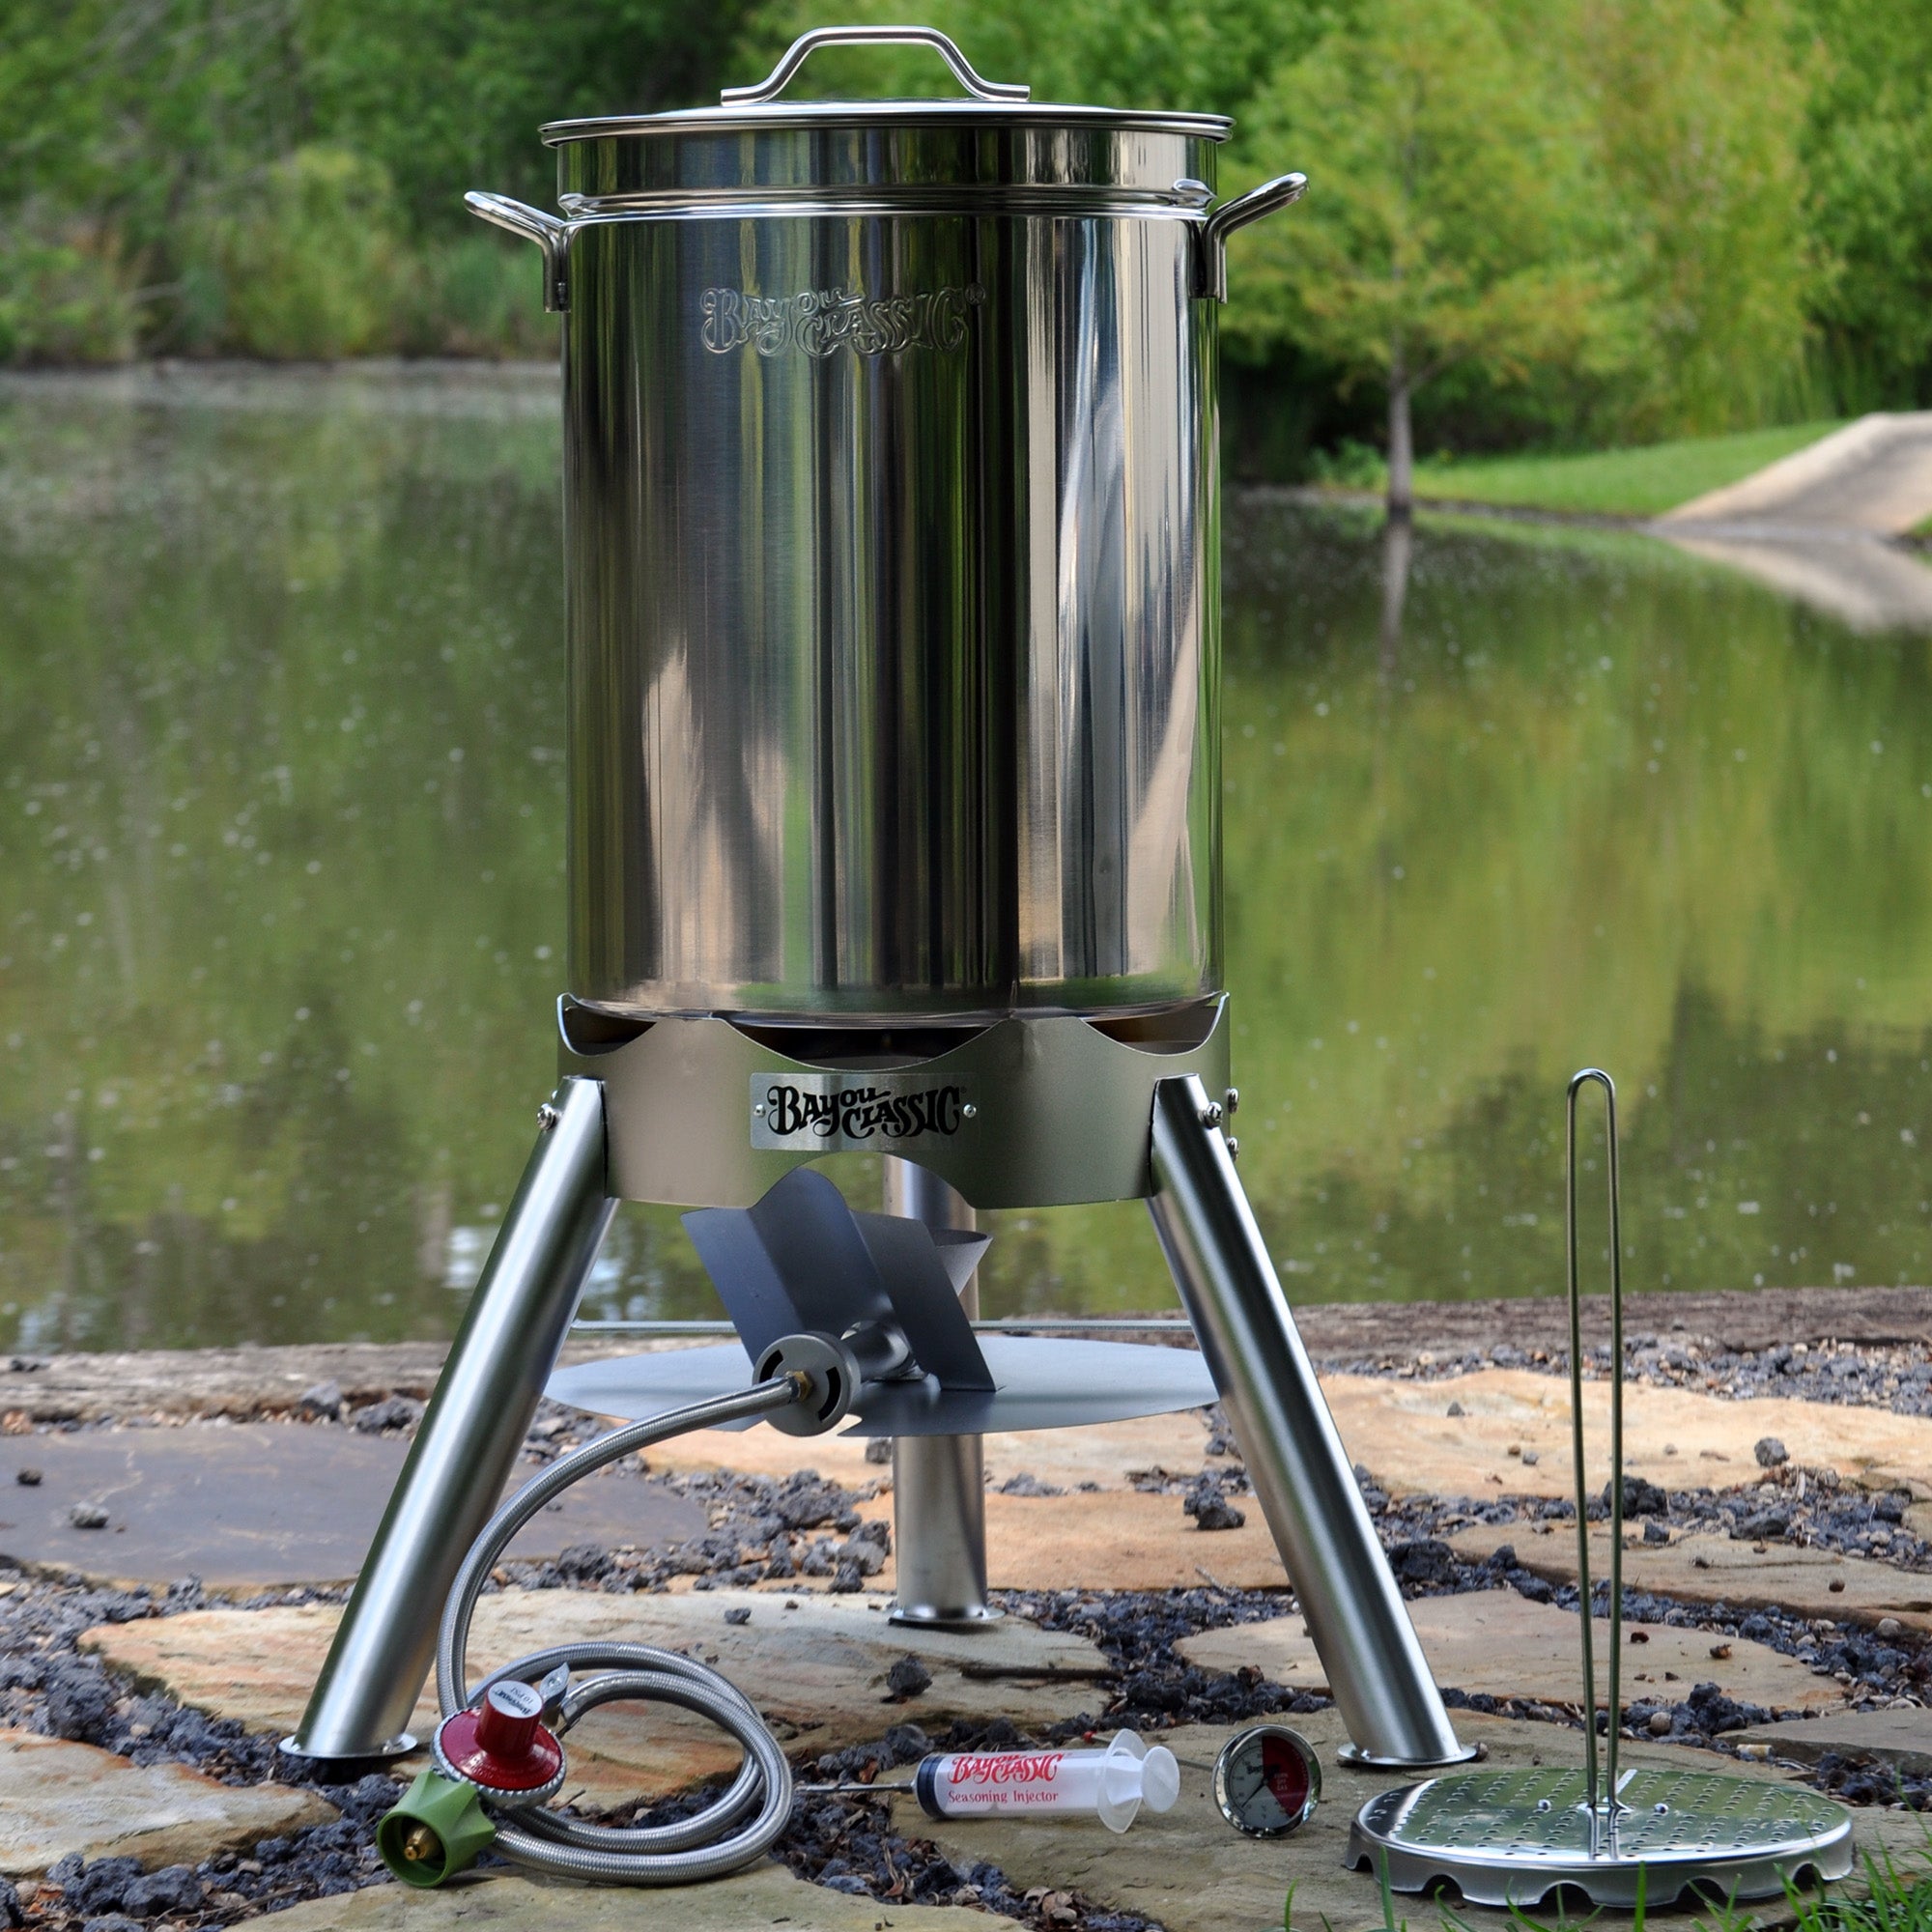 You Can Get This Turkey Fryer Kit for 46% Off, Just in Time for